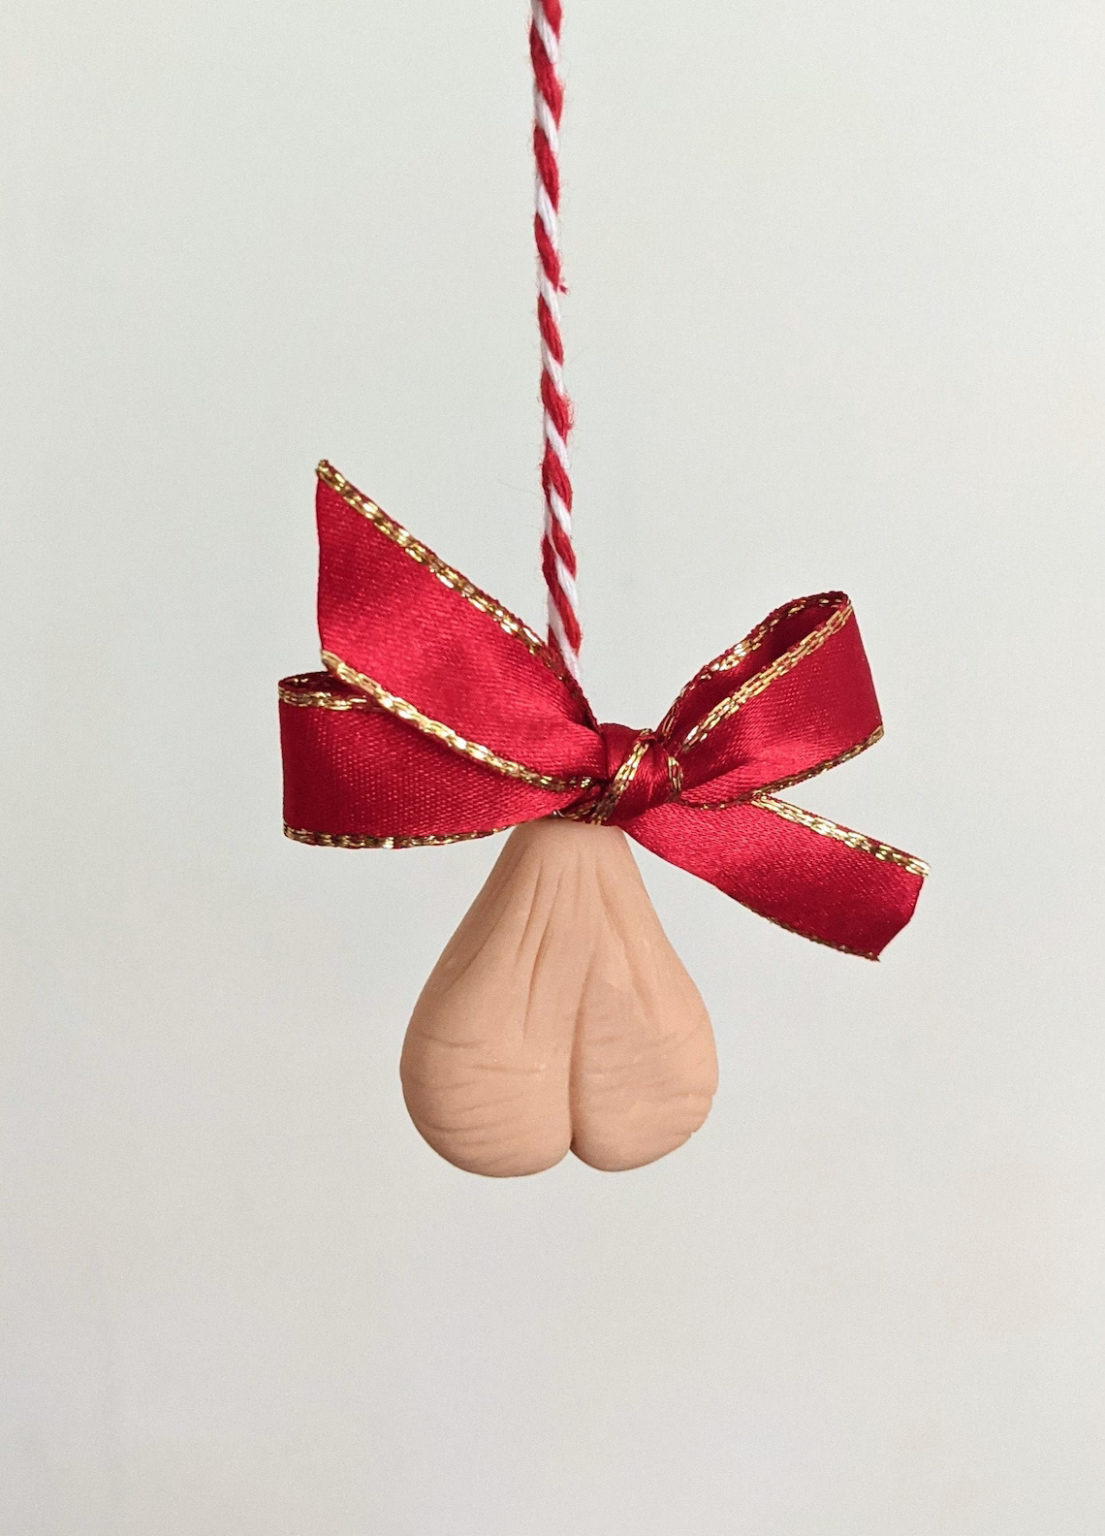 Ball sack ornament by Eclectic By Katie For Adults